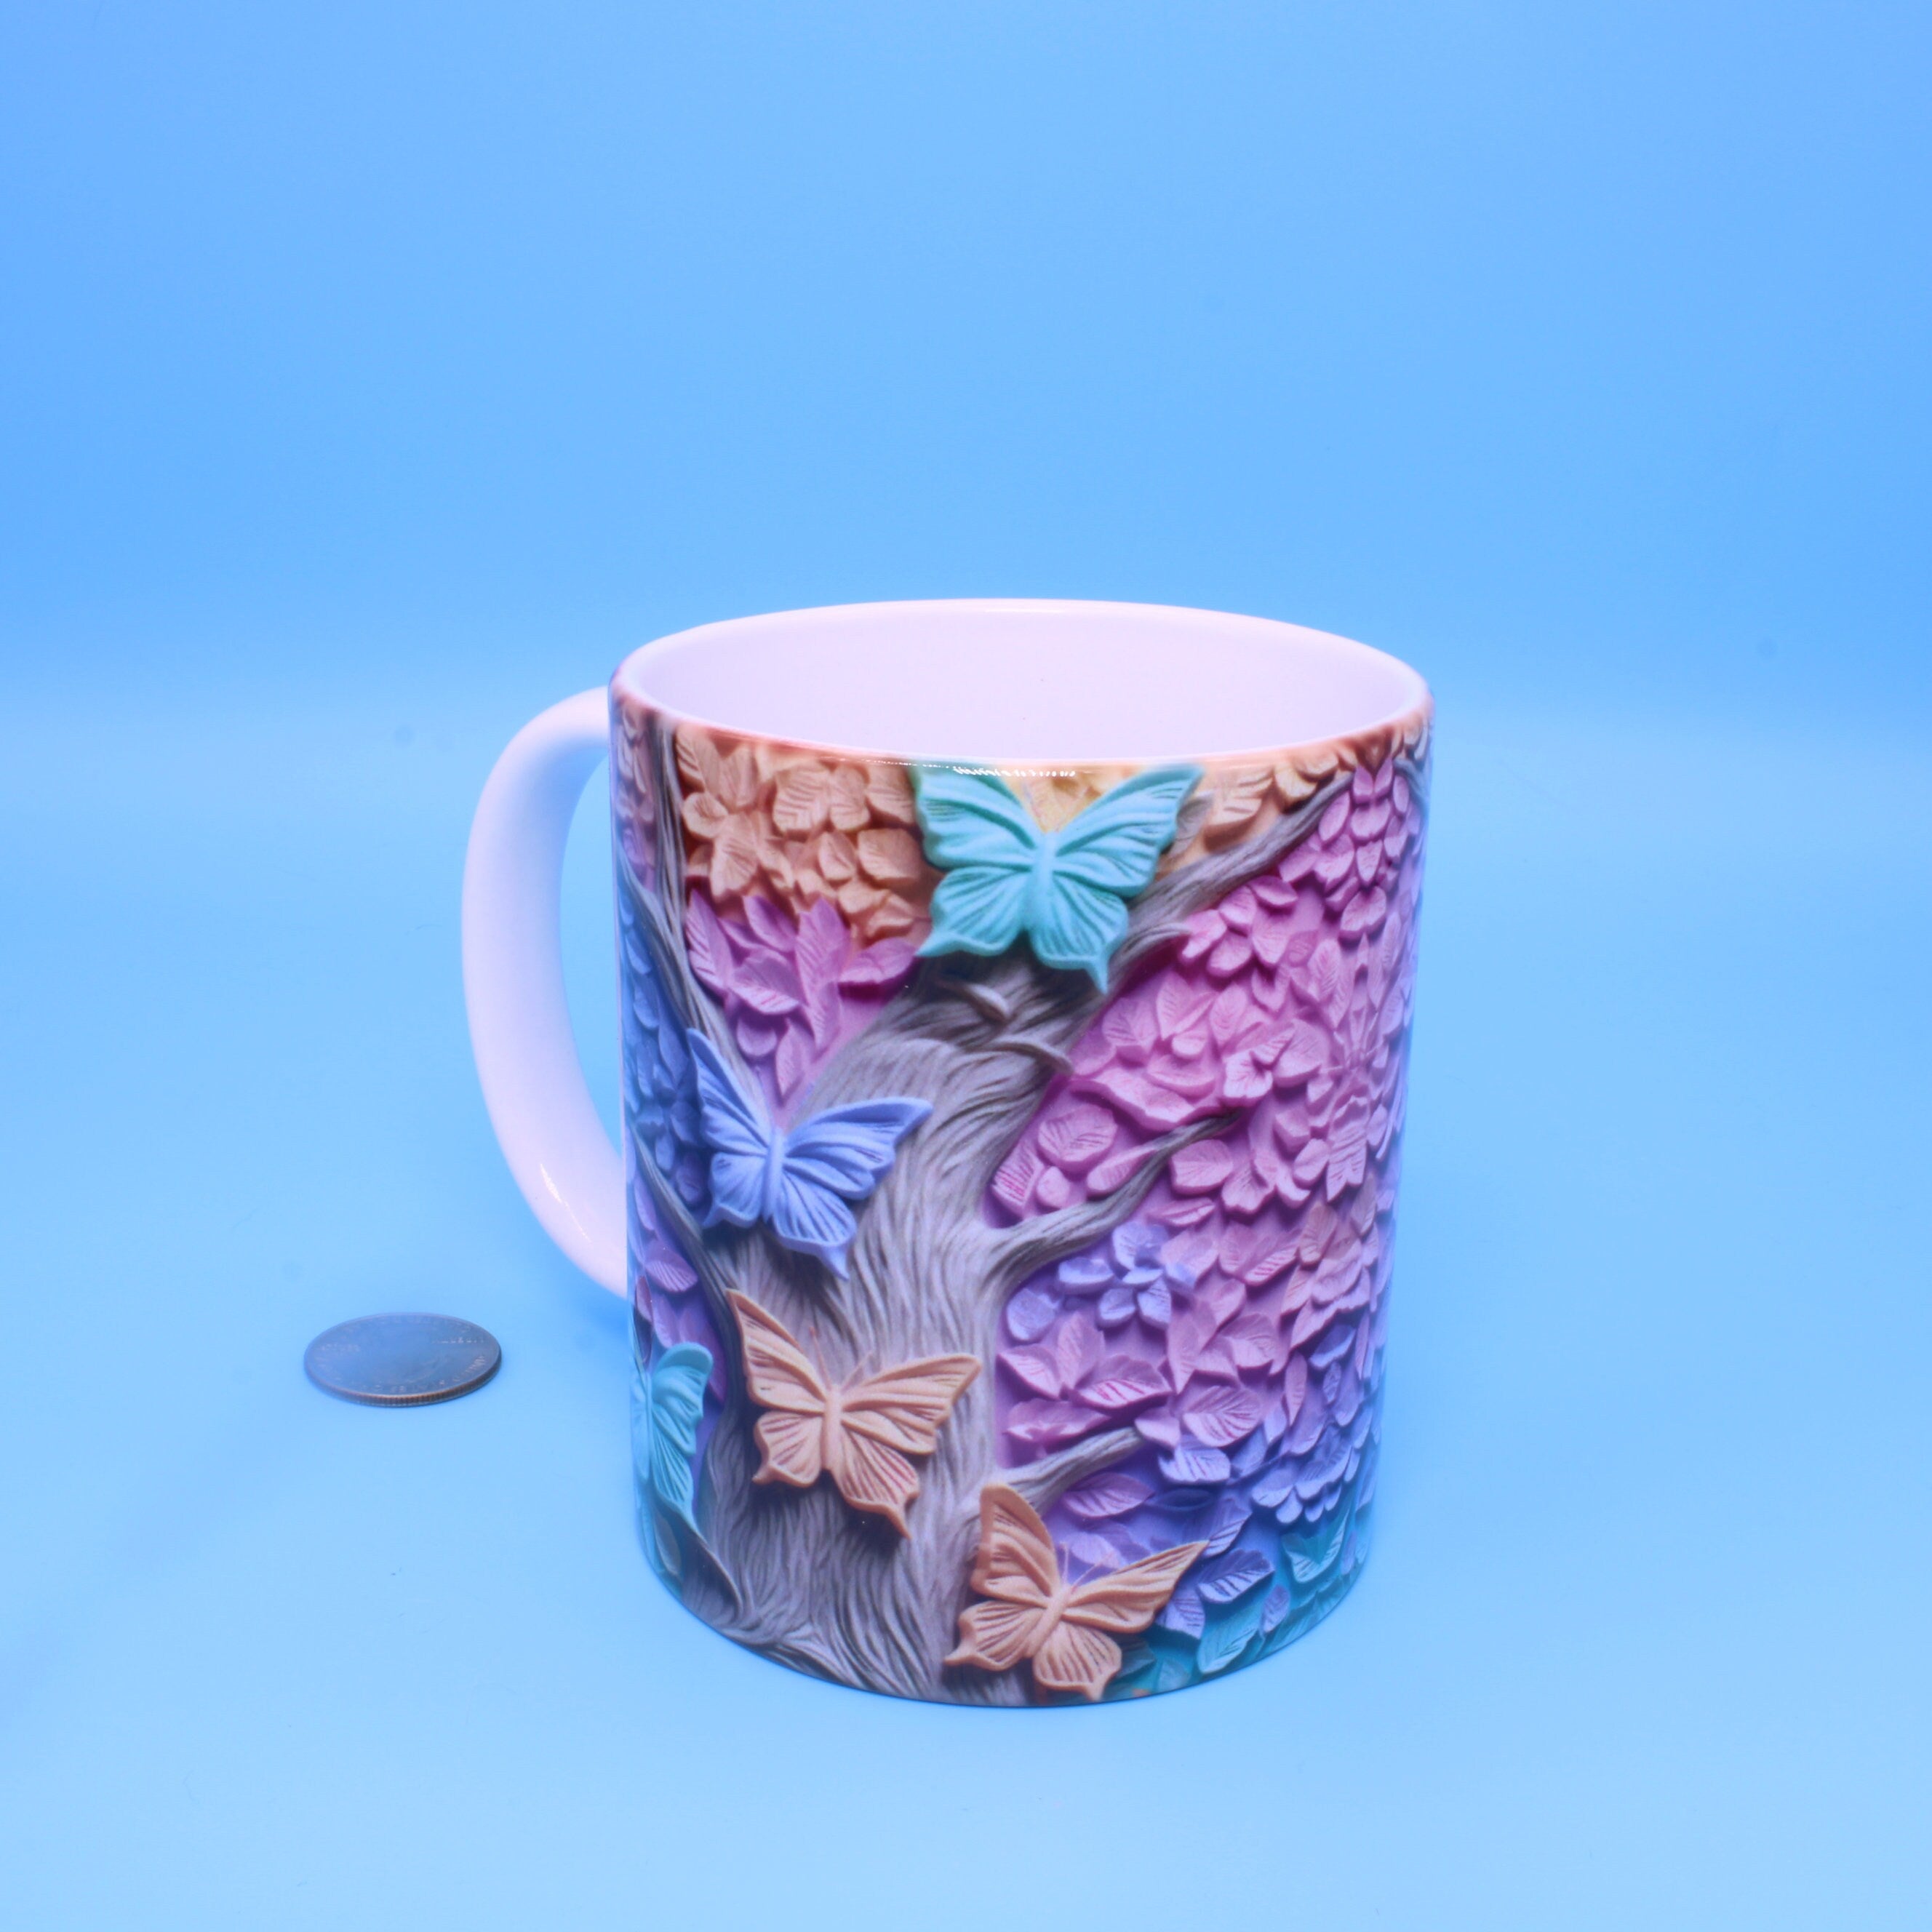 Pastel Butterfly Ceramic Mug - Hot chocolate | Coffee | Hot Tea 11 0z. Perfect gift!